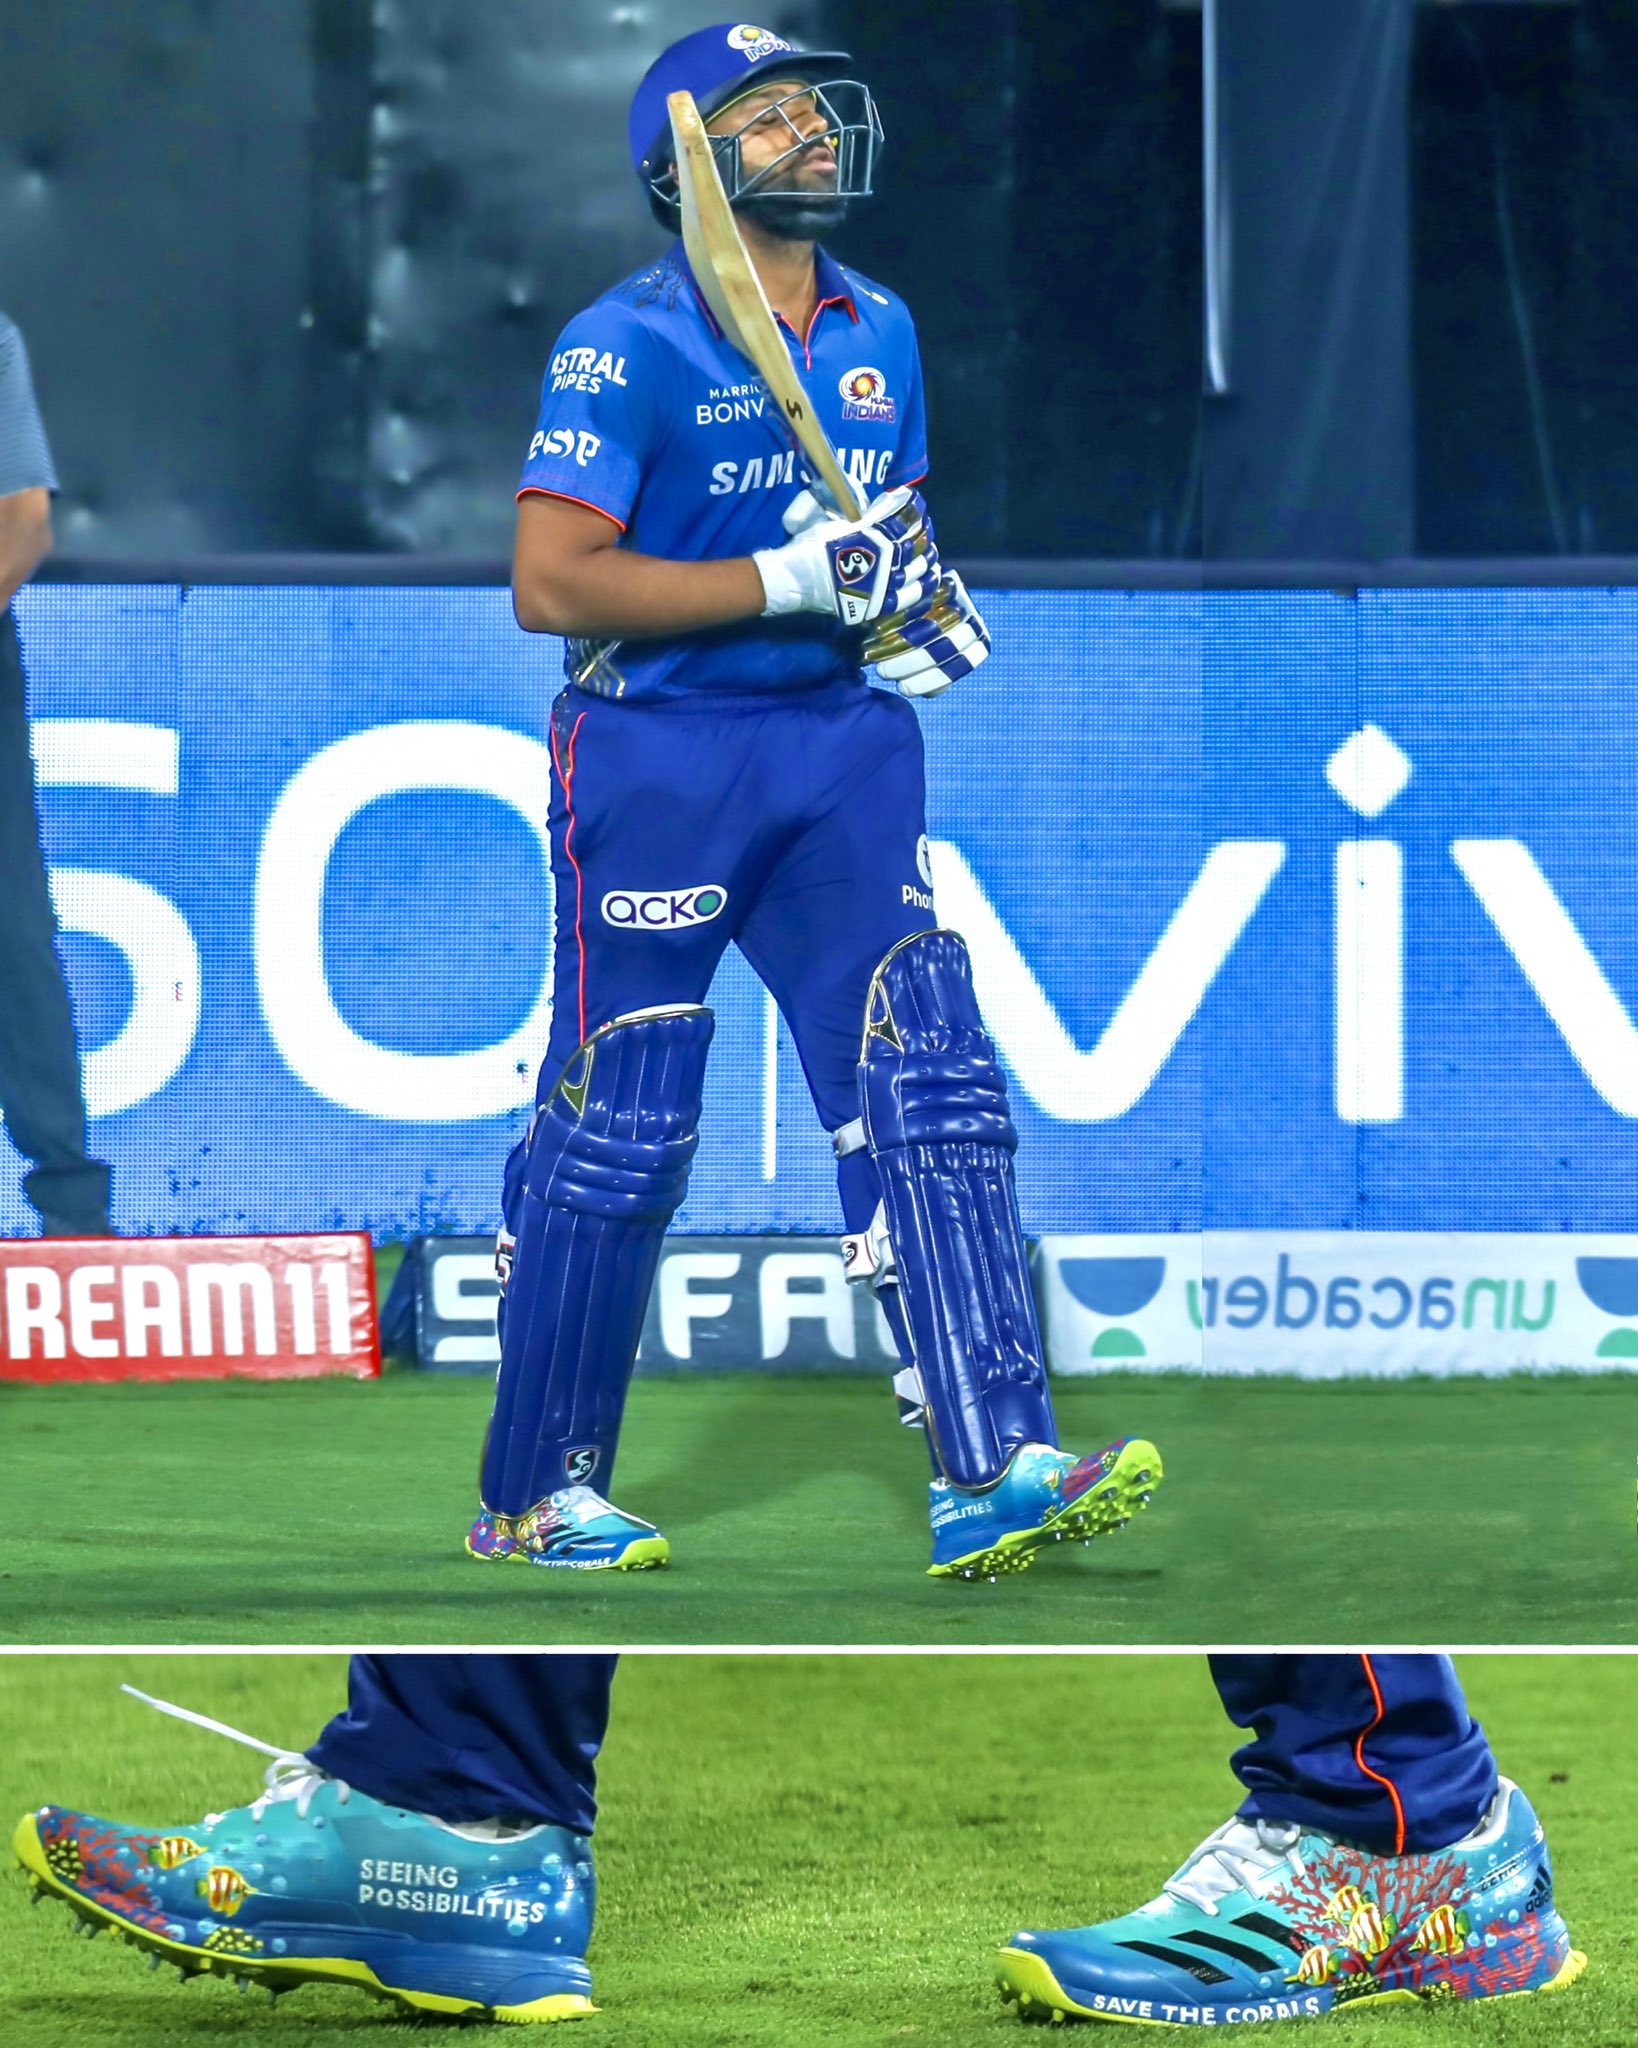 Rohit Sharma shares third message for environment on his shoes